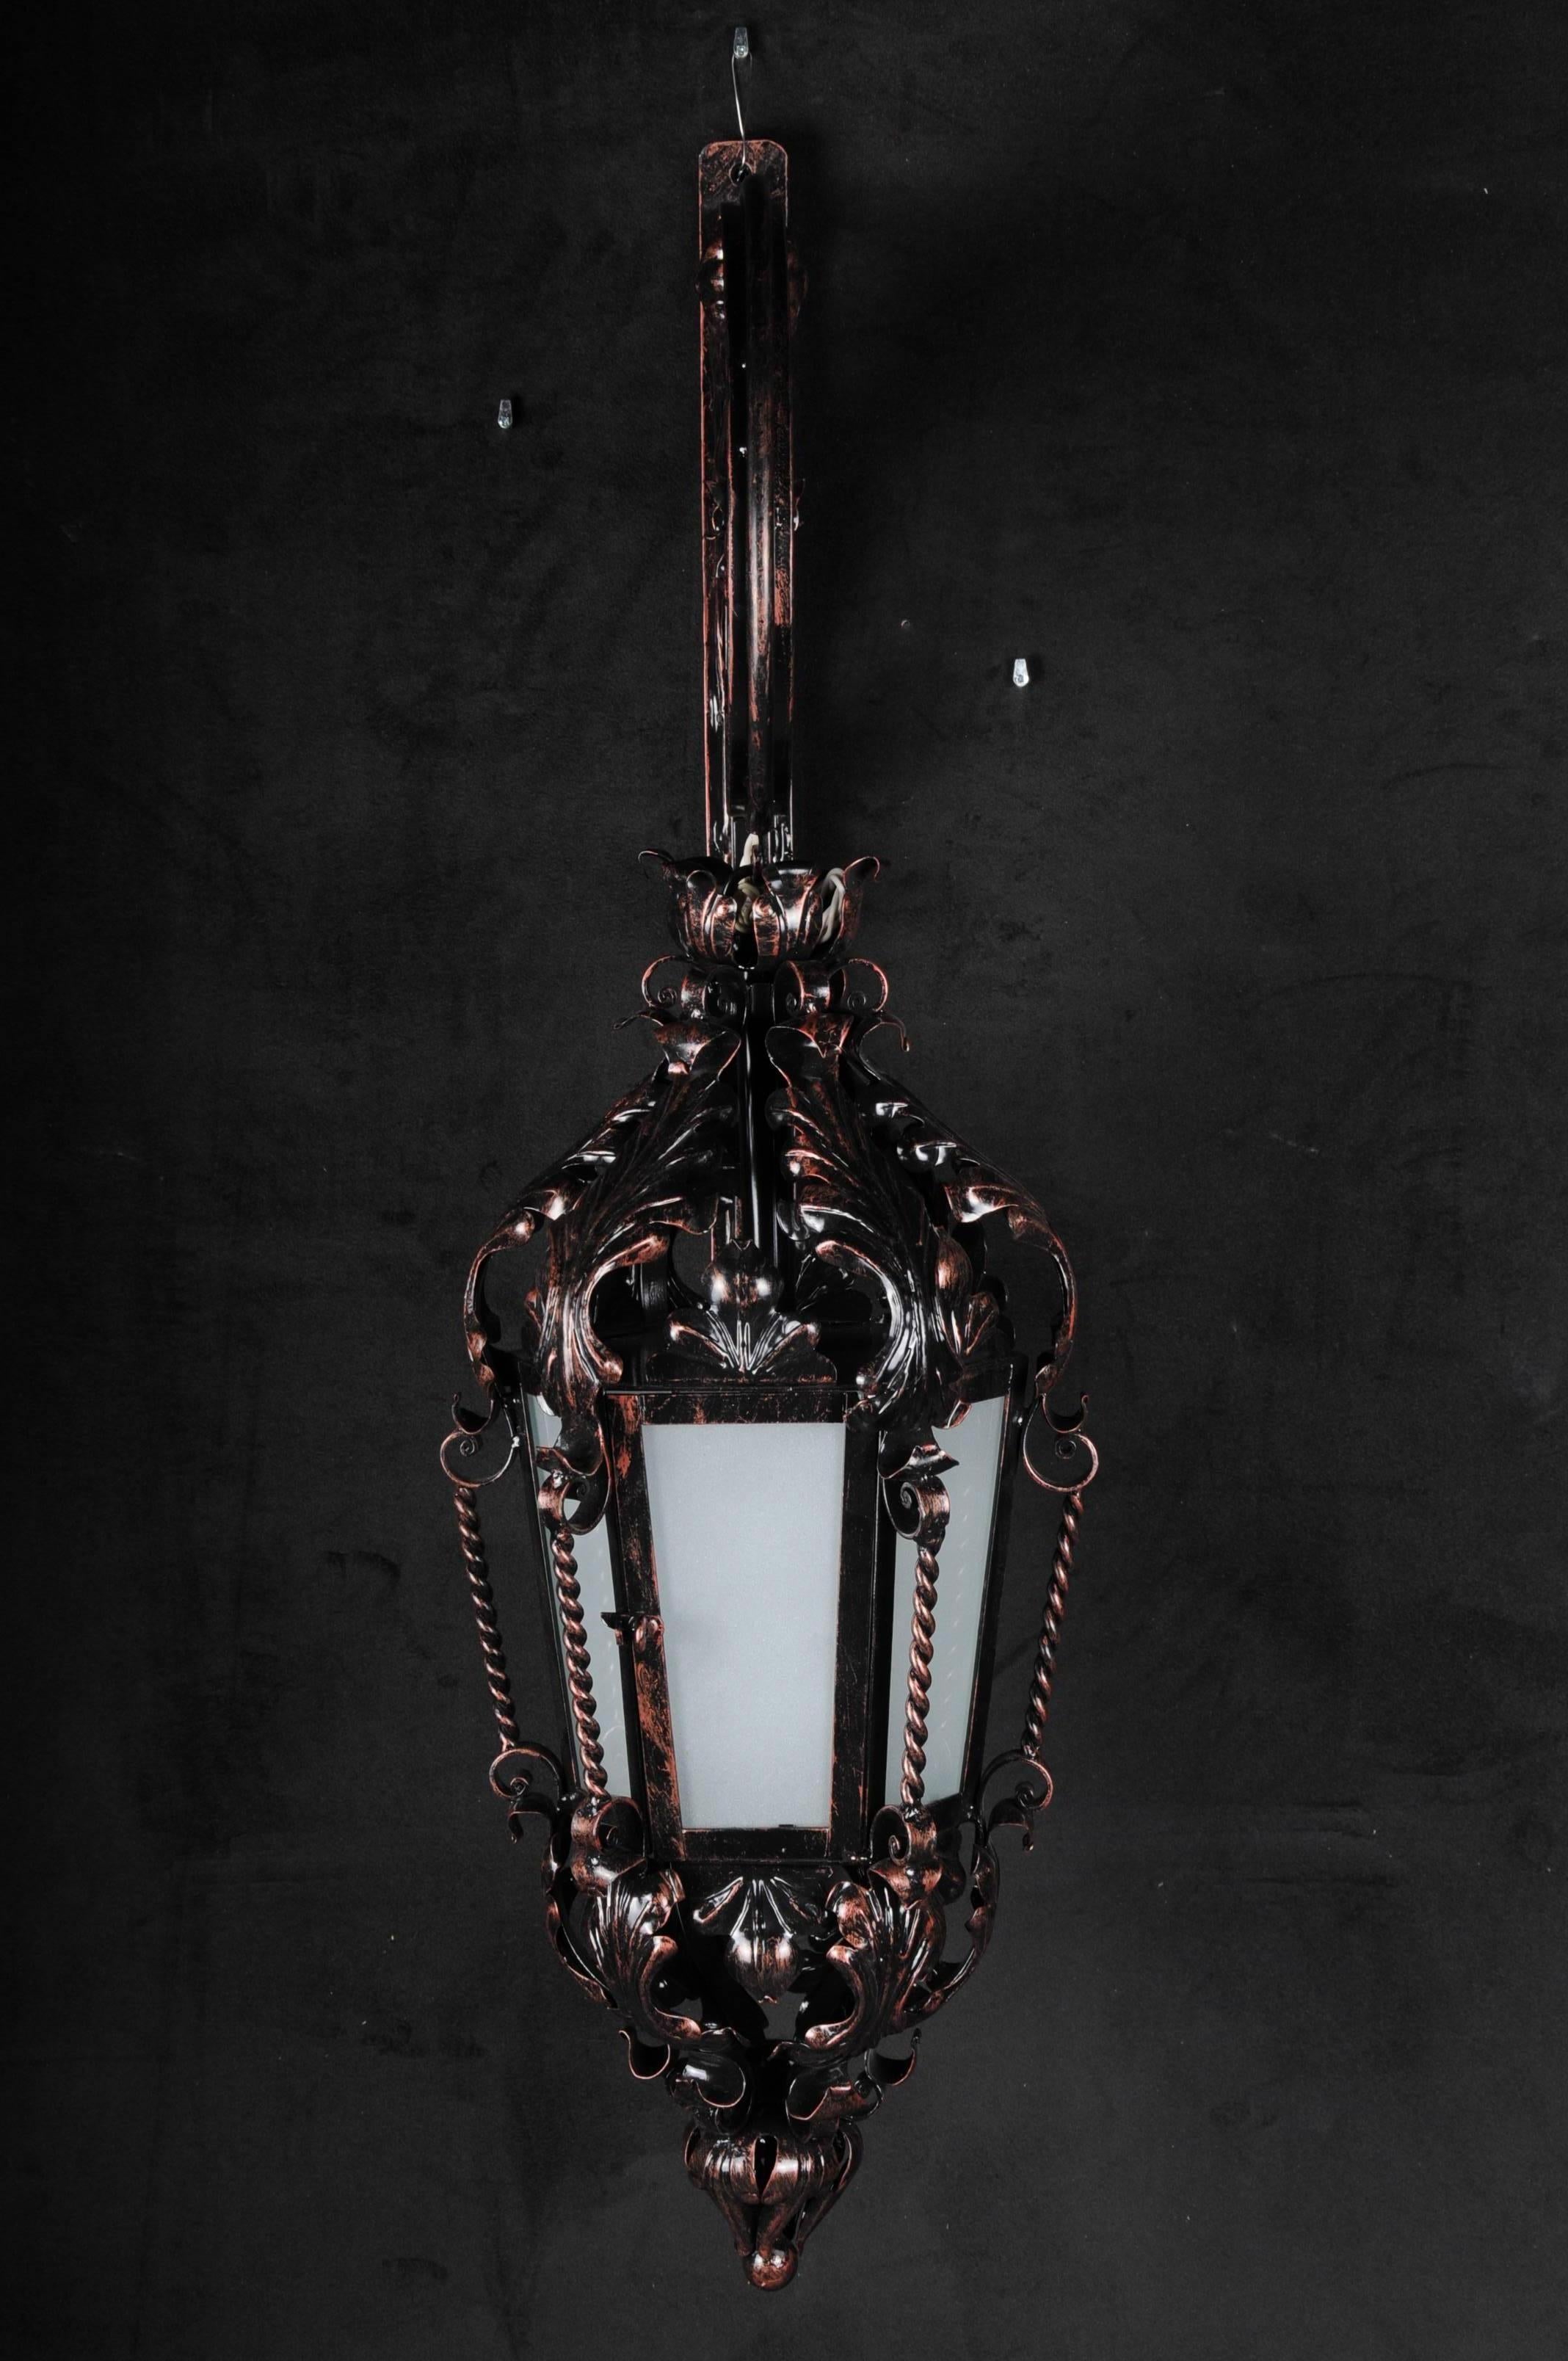 Neoclassical Revival Unique Wrought Iron Hanging Lantern Wall Lamp, Historicism